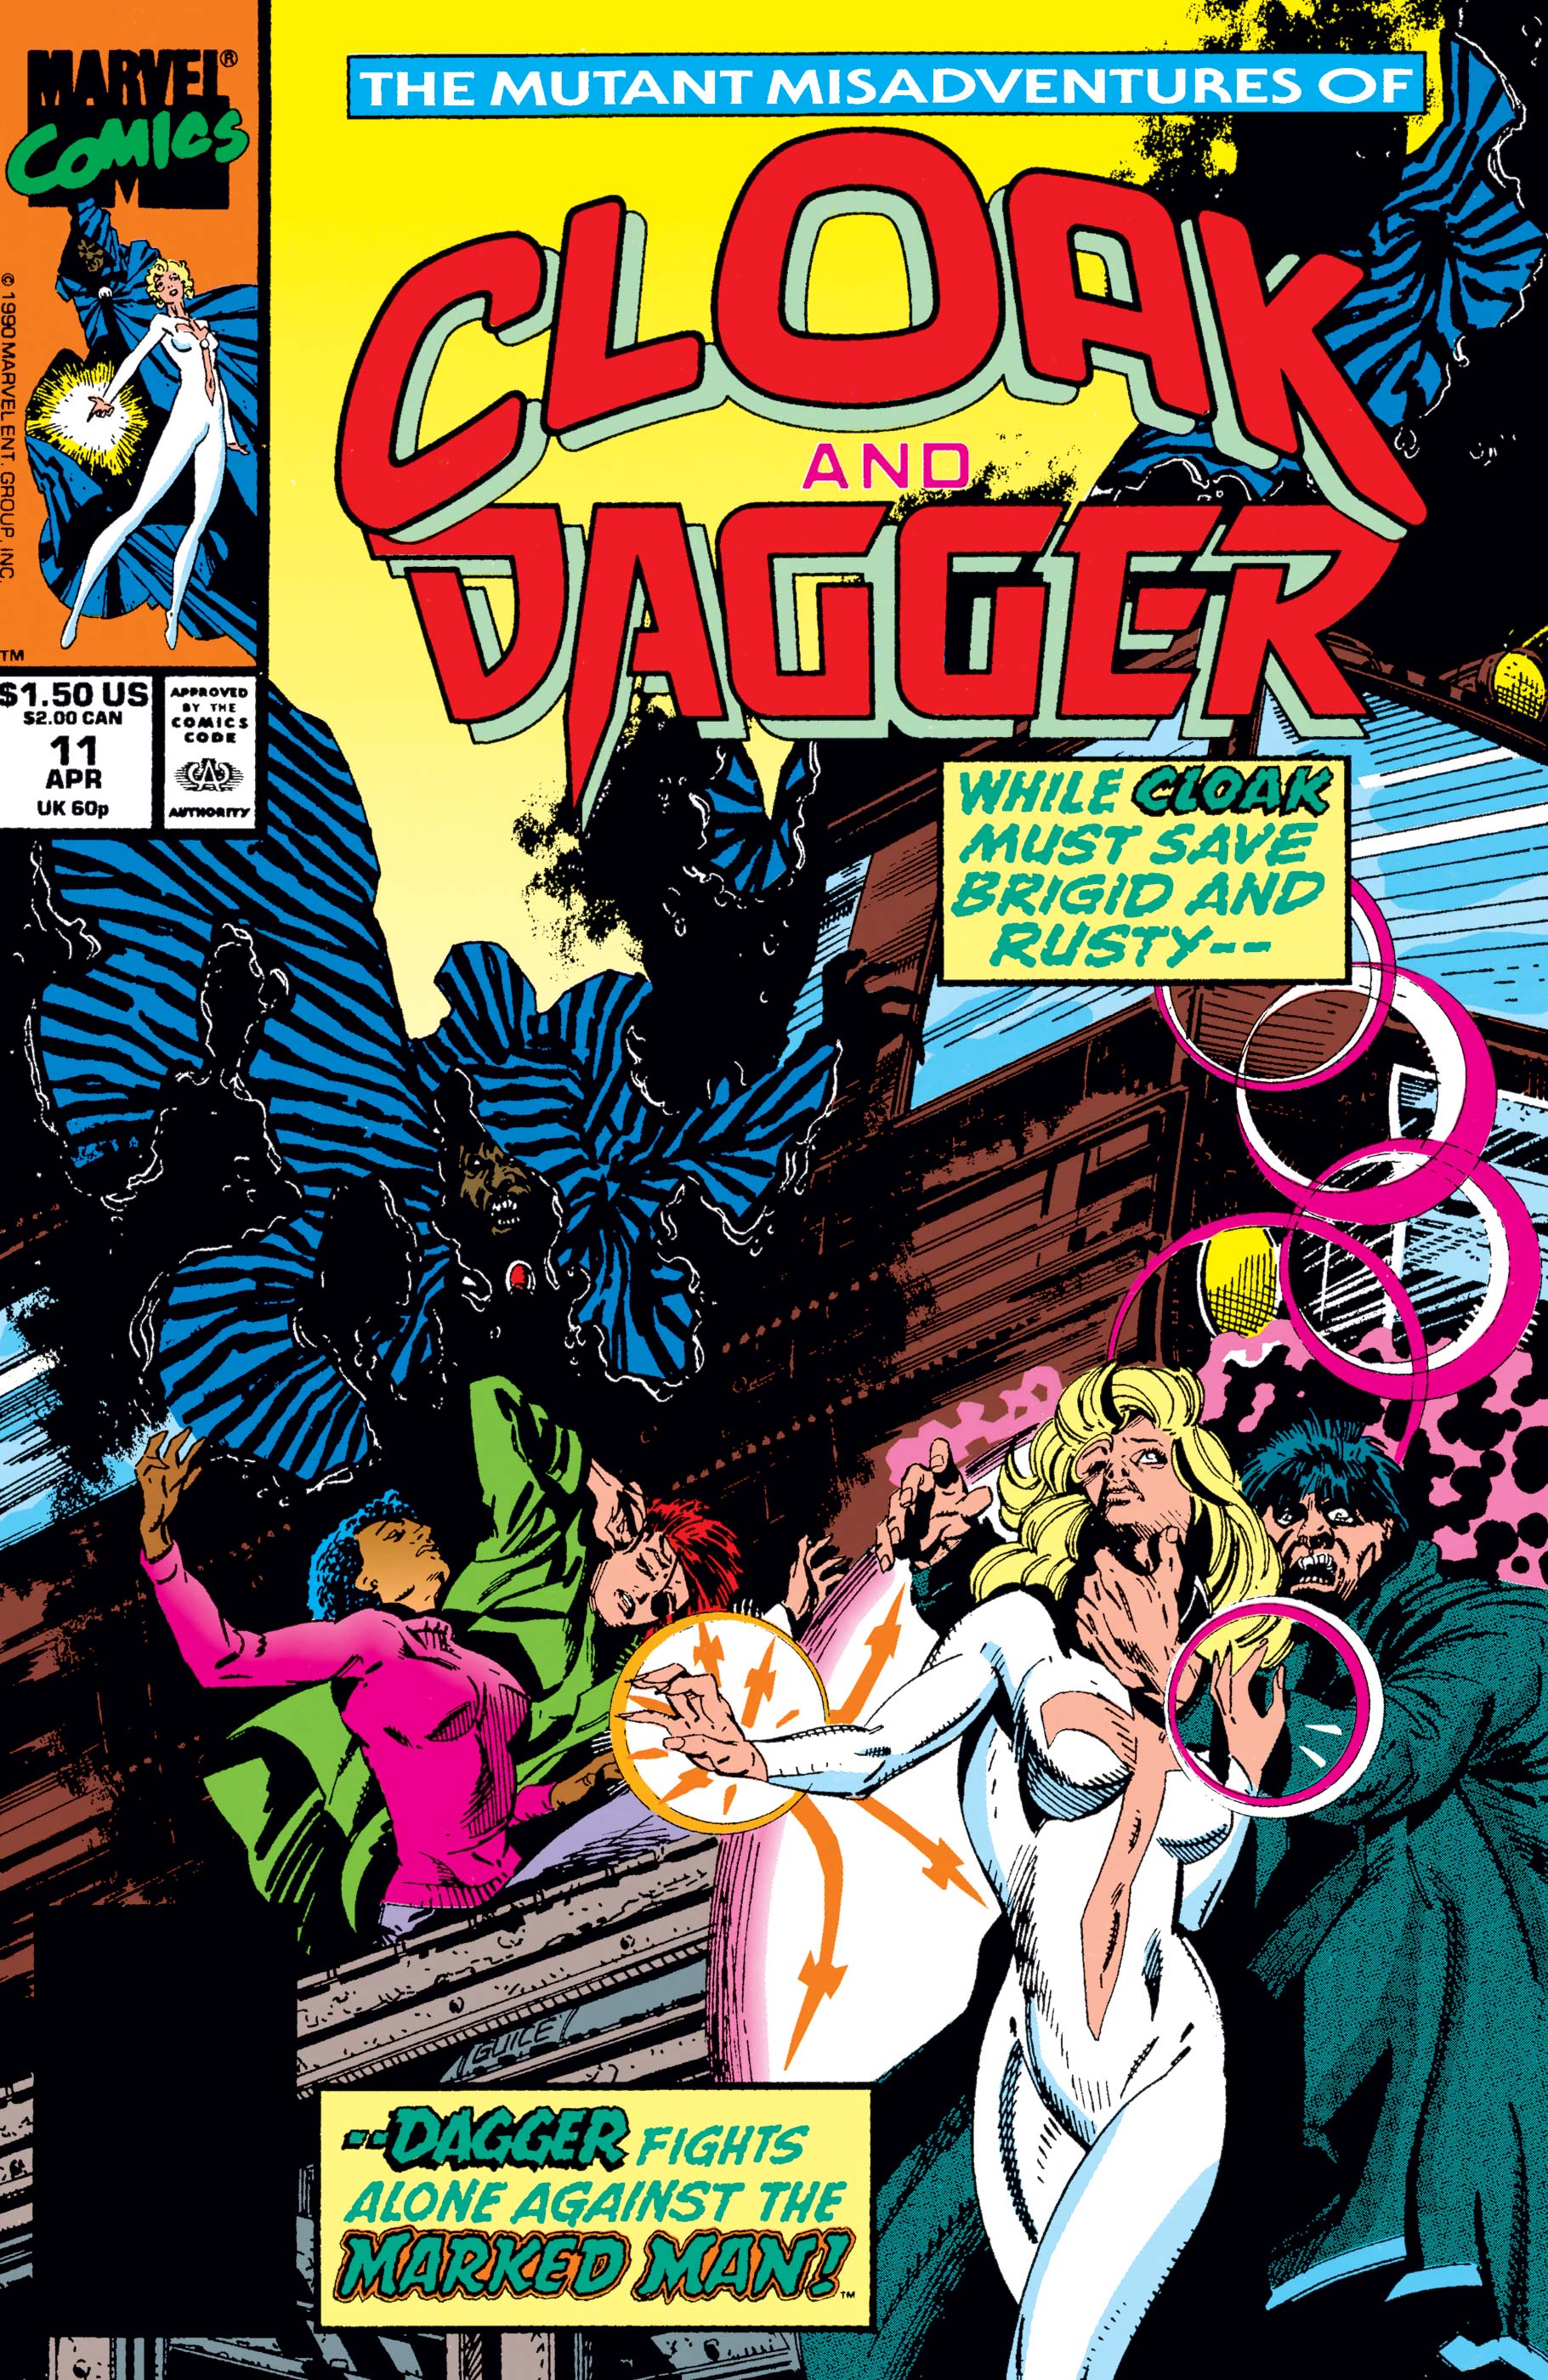 The Mutant Misadventures of Cloak and Dagger (1988) #11